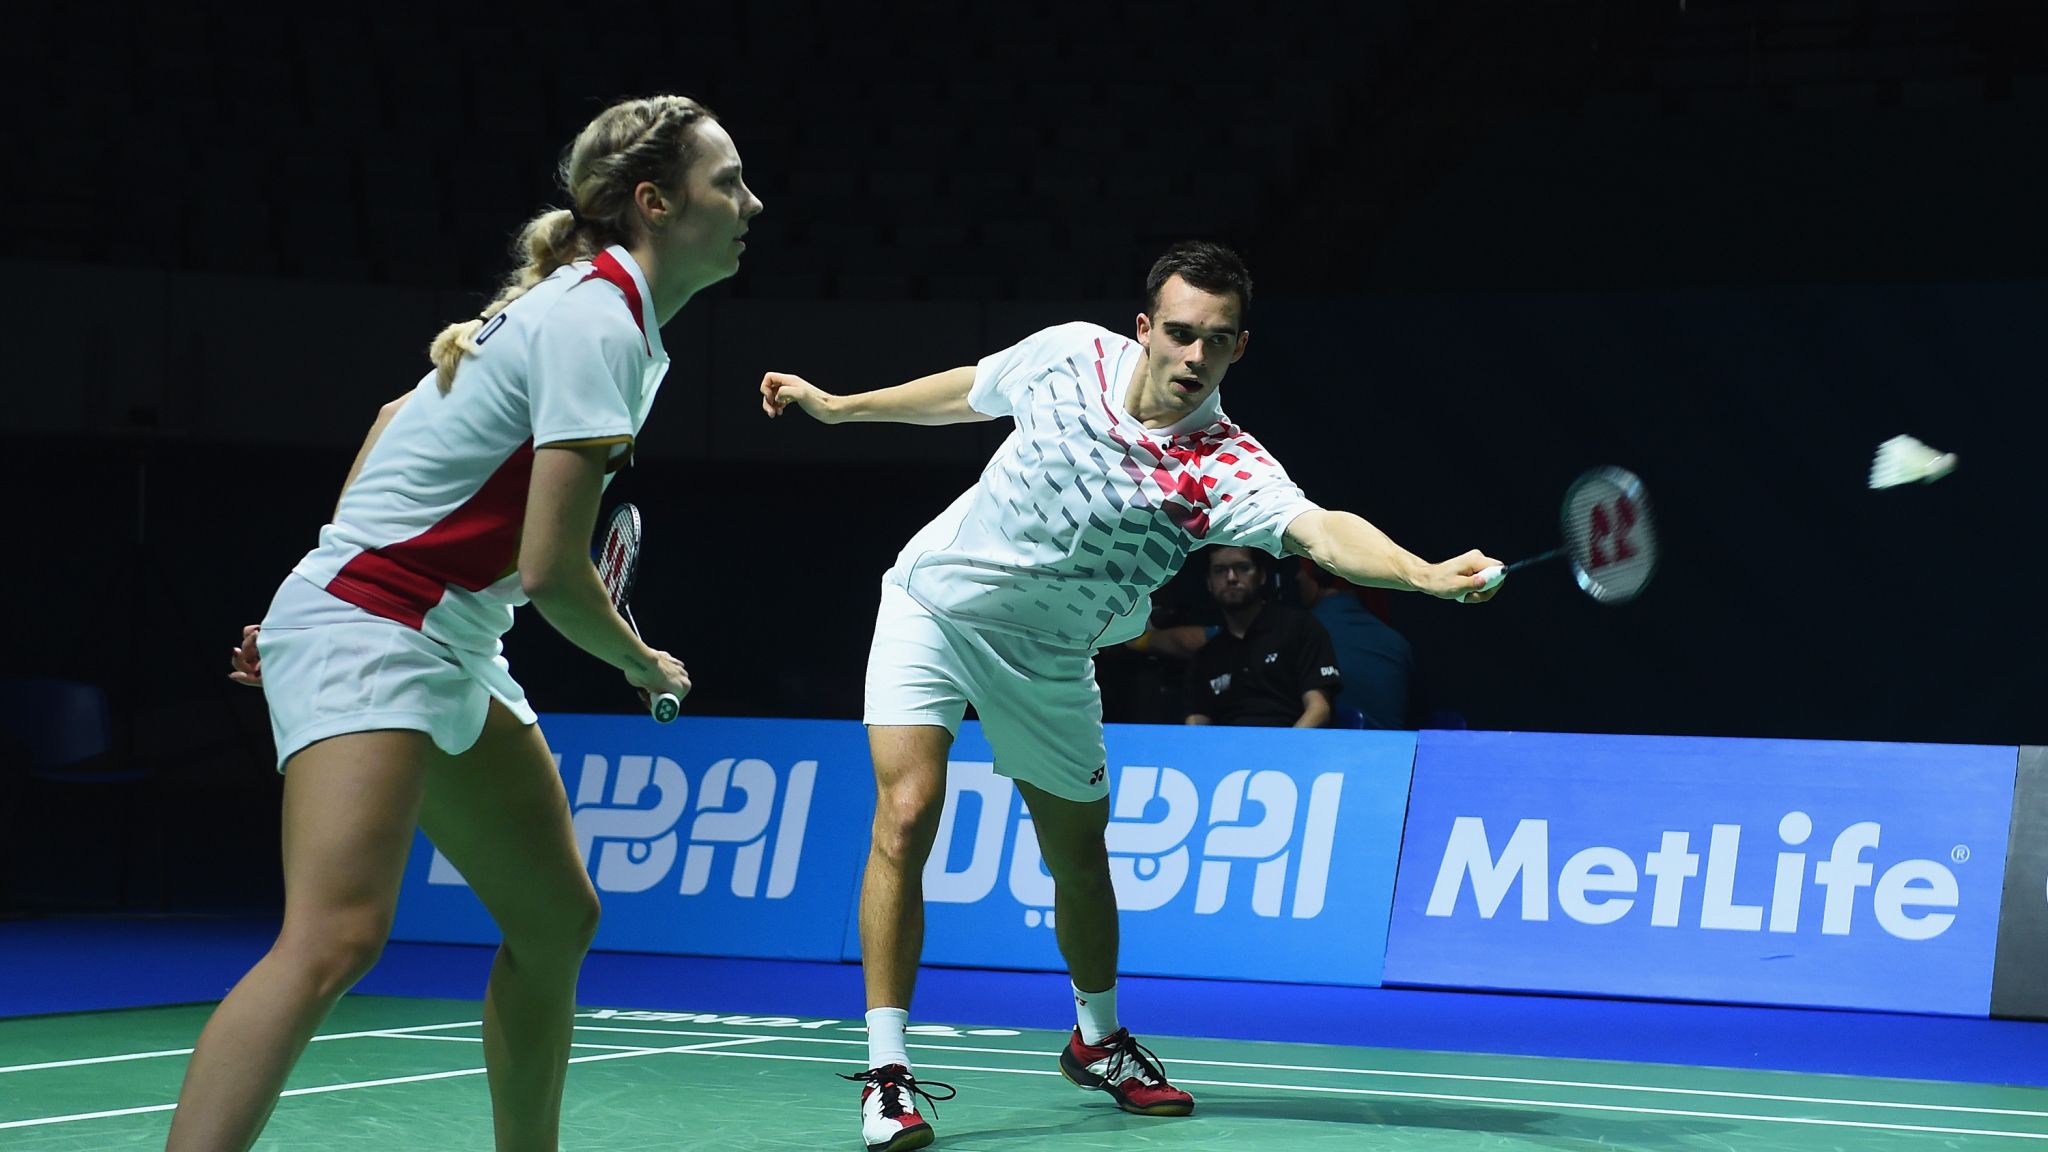 Chris and Gabby Adcock handed difficult draw at the YONEX All England Open Badminton Championships Badminton News Sky Sports